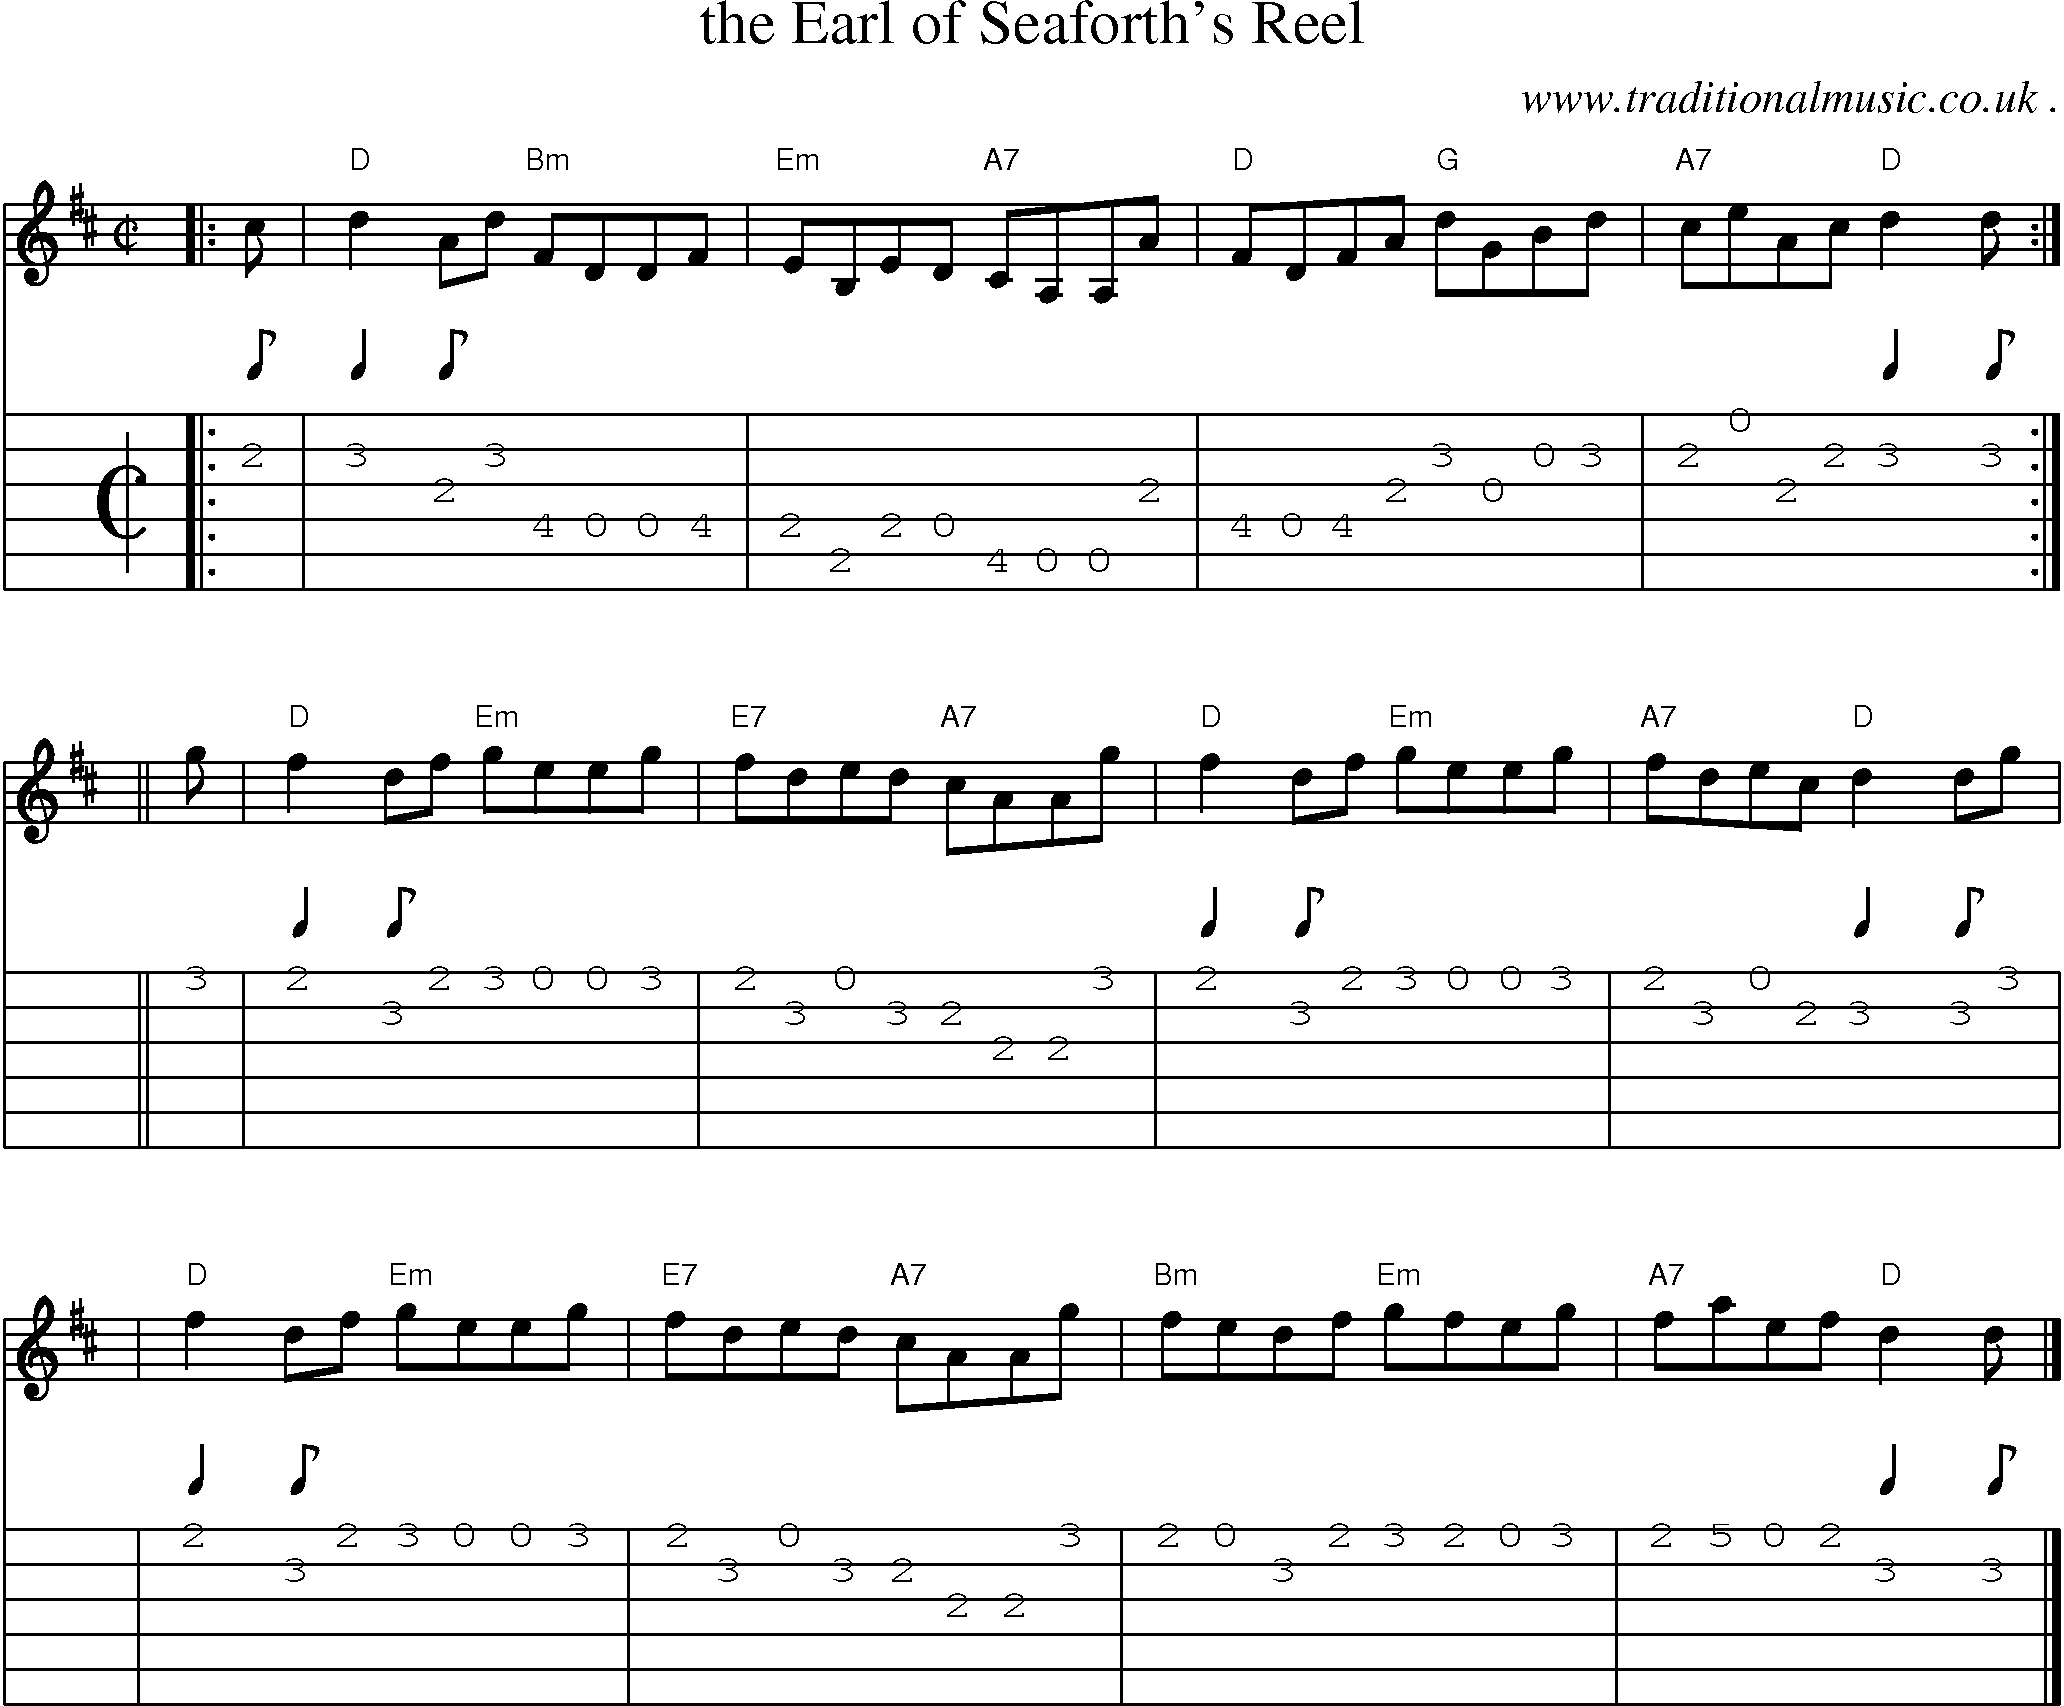 Sheet-music  score, Chords and Guitar Tabs for The Earl Of Seaforths Reel